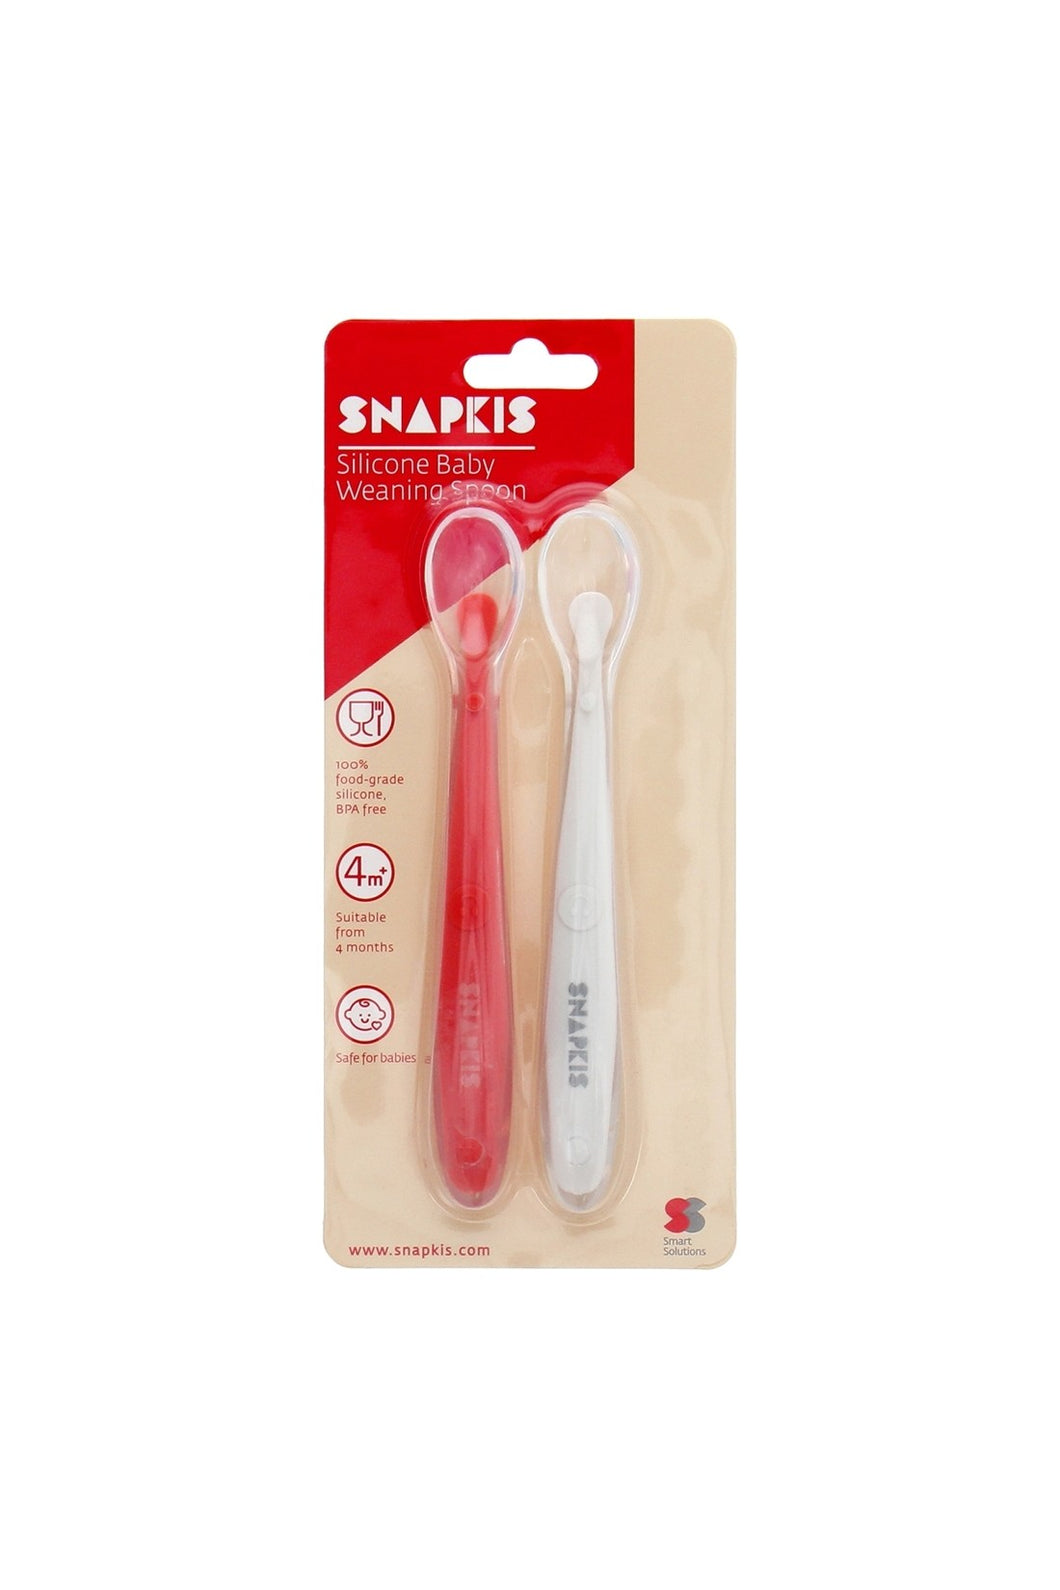 Snapkis Silicone Weaning Spoon 2Pk 1